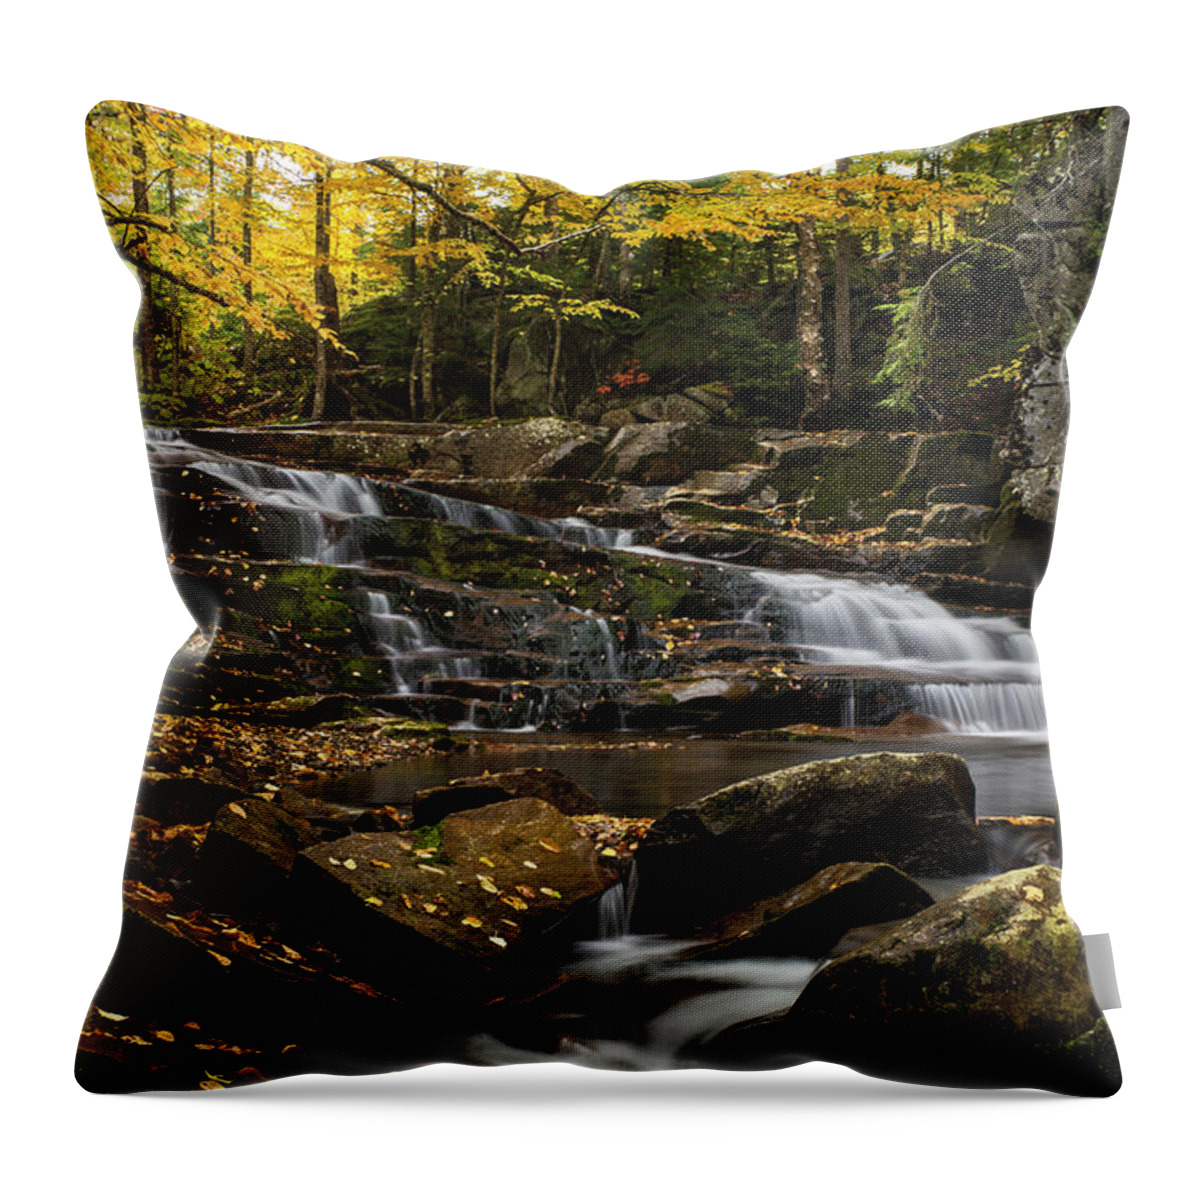 Discovery Throw Pillow featuring the photograph Discovery Falls Autumn by White Mountain Images